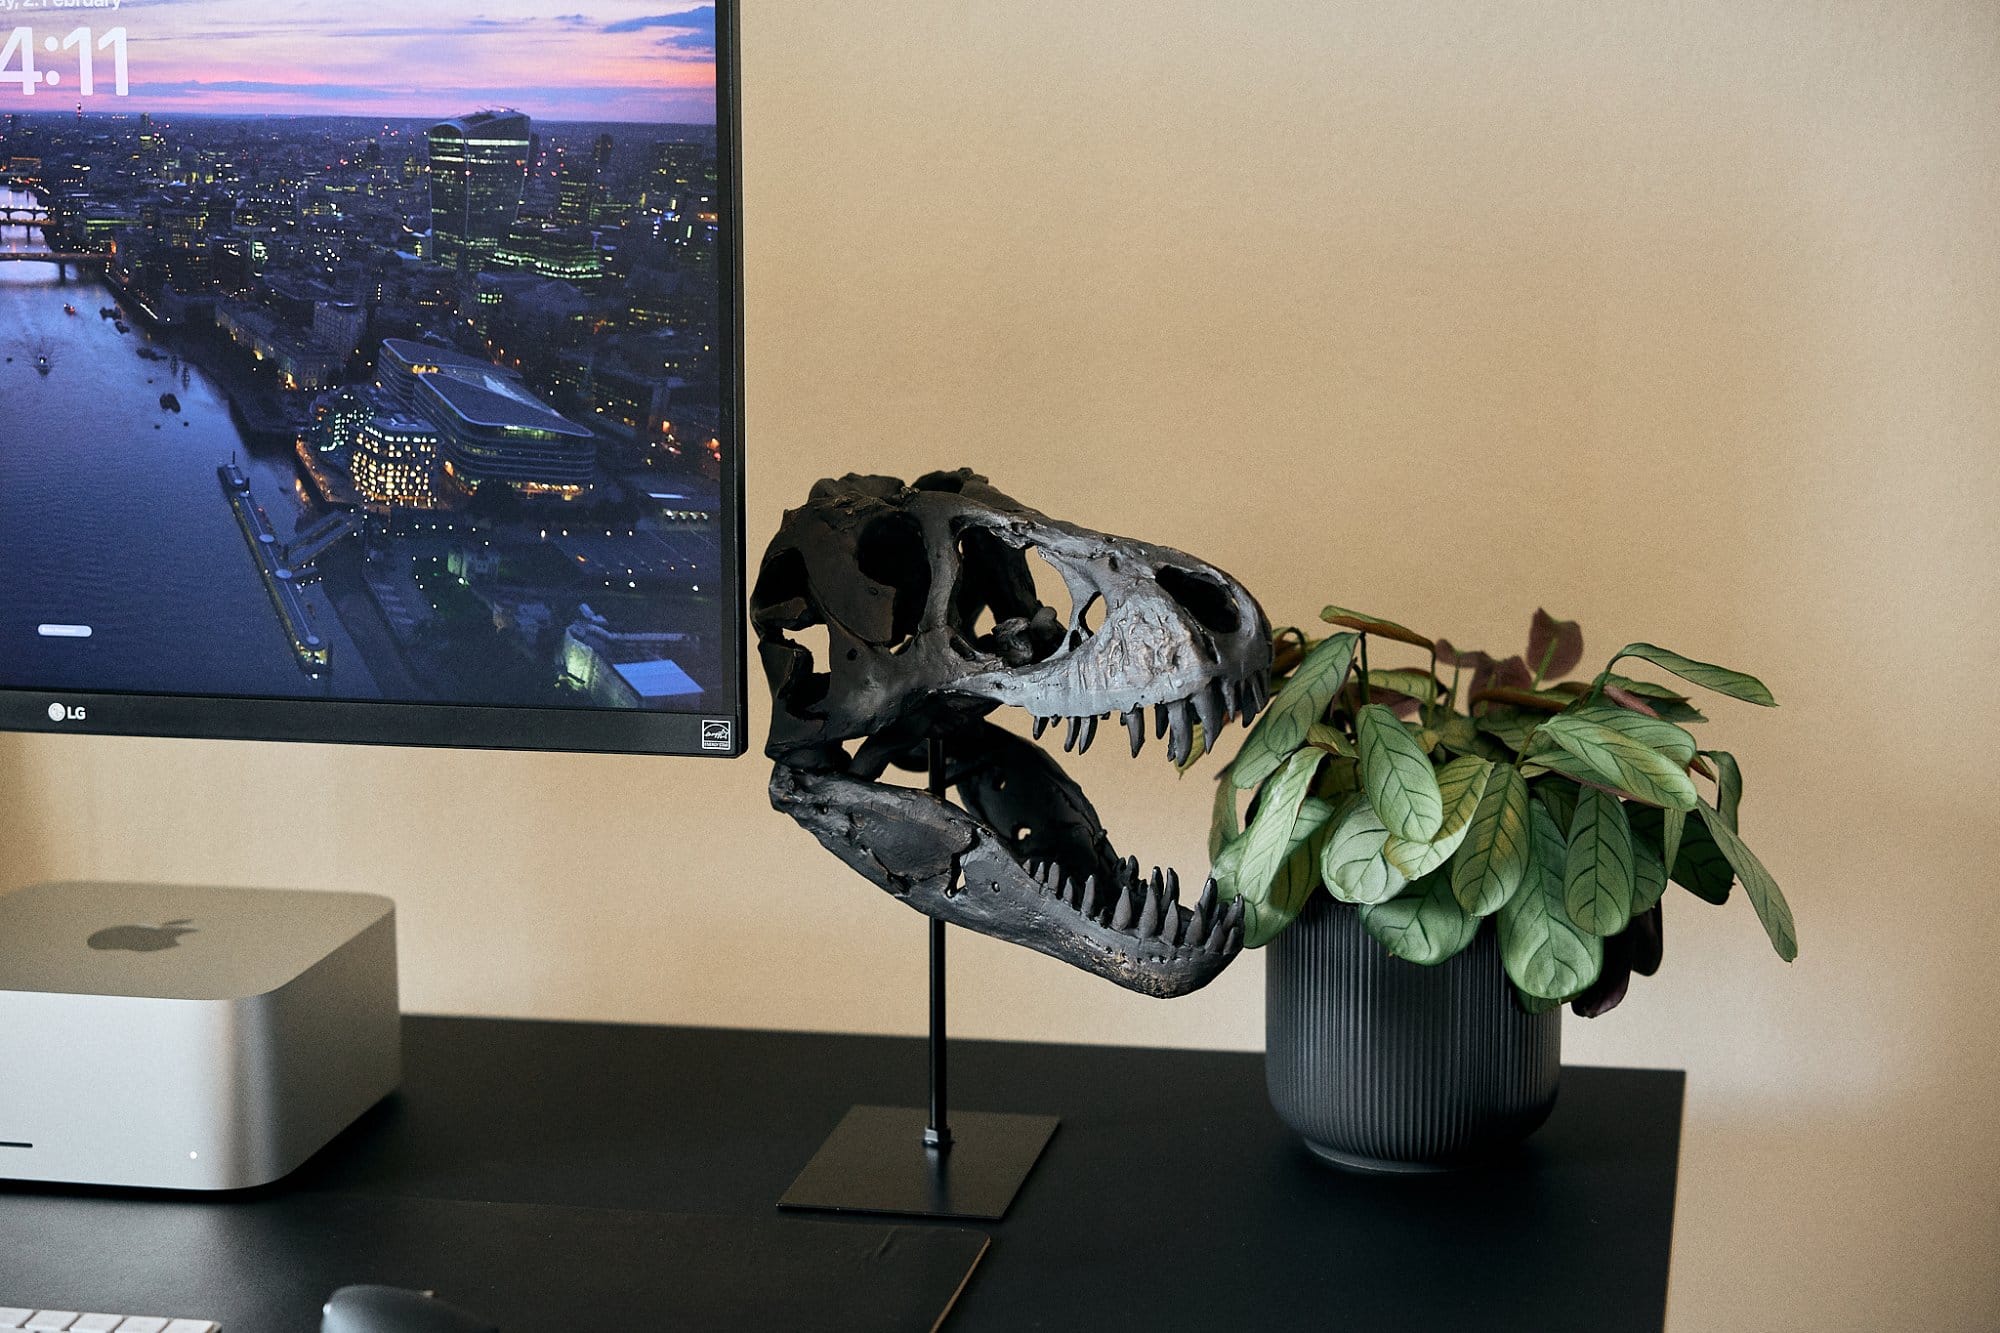 Sleek desk setup with a twilight cityscape on a large monitor, a compact Apple Mac Studio, and a decorative dinosaur skull model beside a potted plant, creating an organised and creative workspace